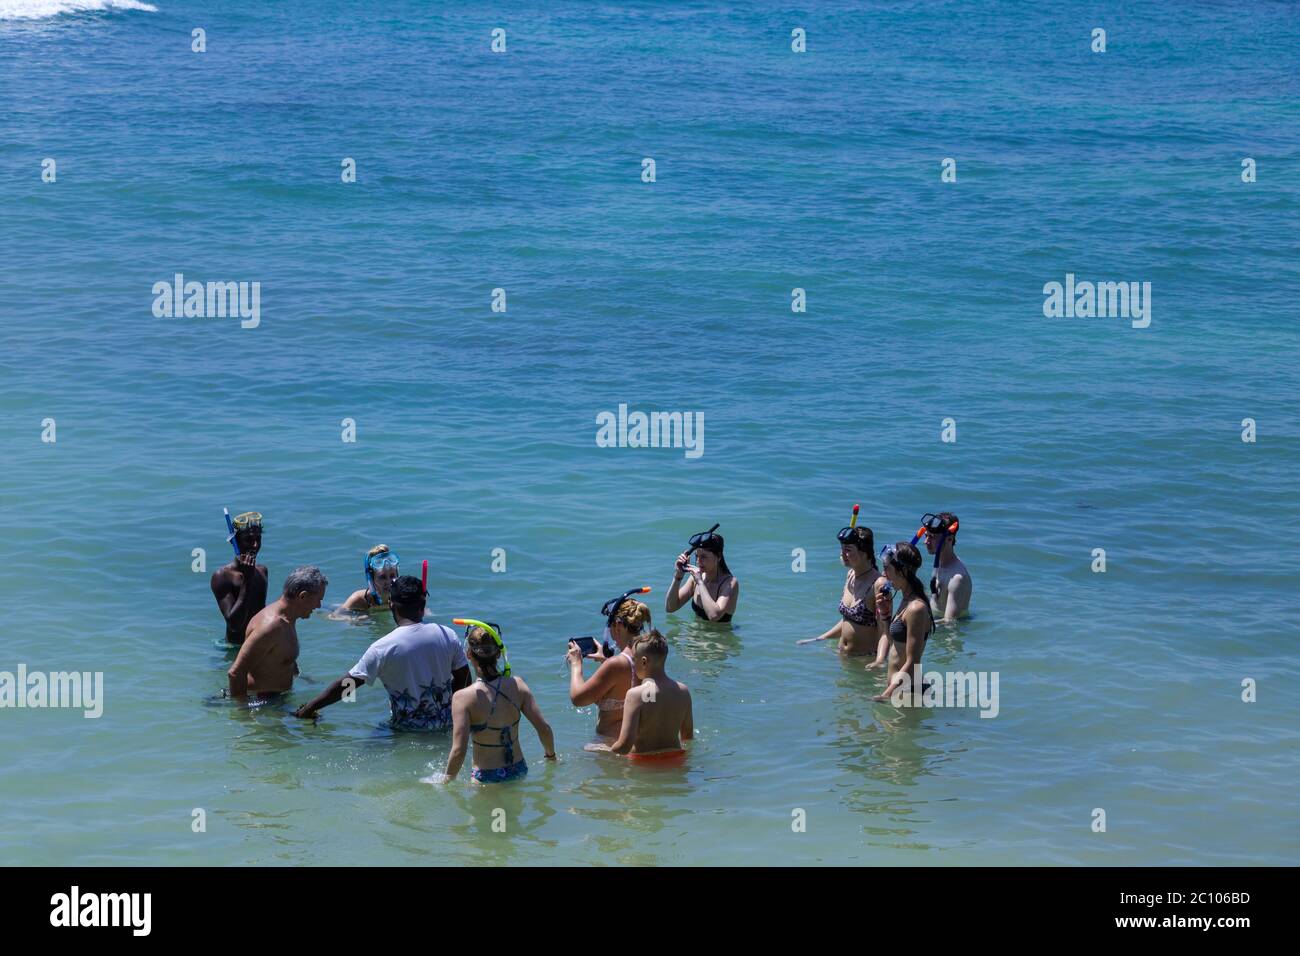 Snorkeling training activity in the sea for the tourist Stock Photo